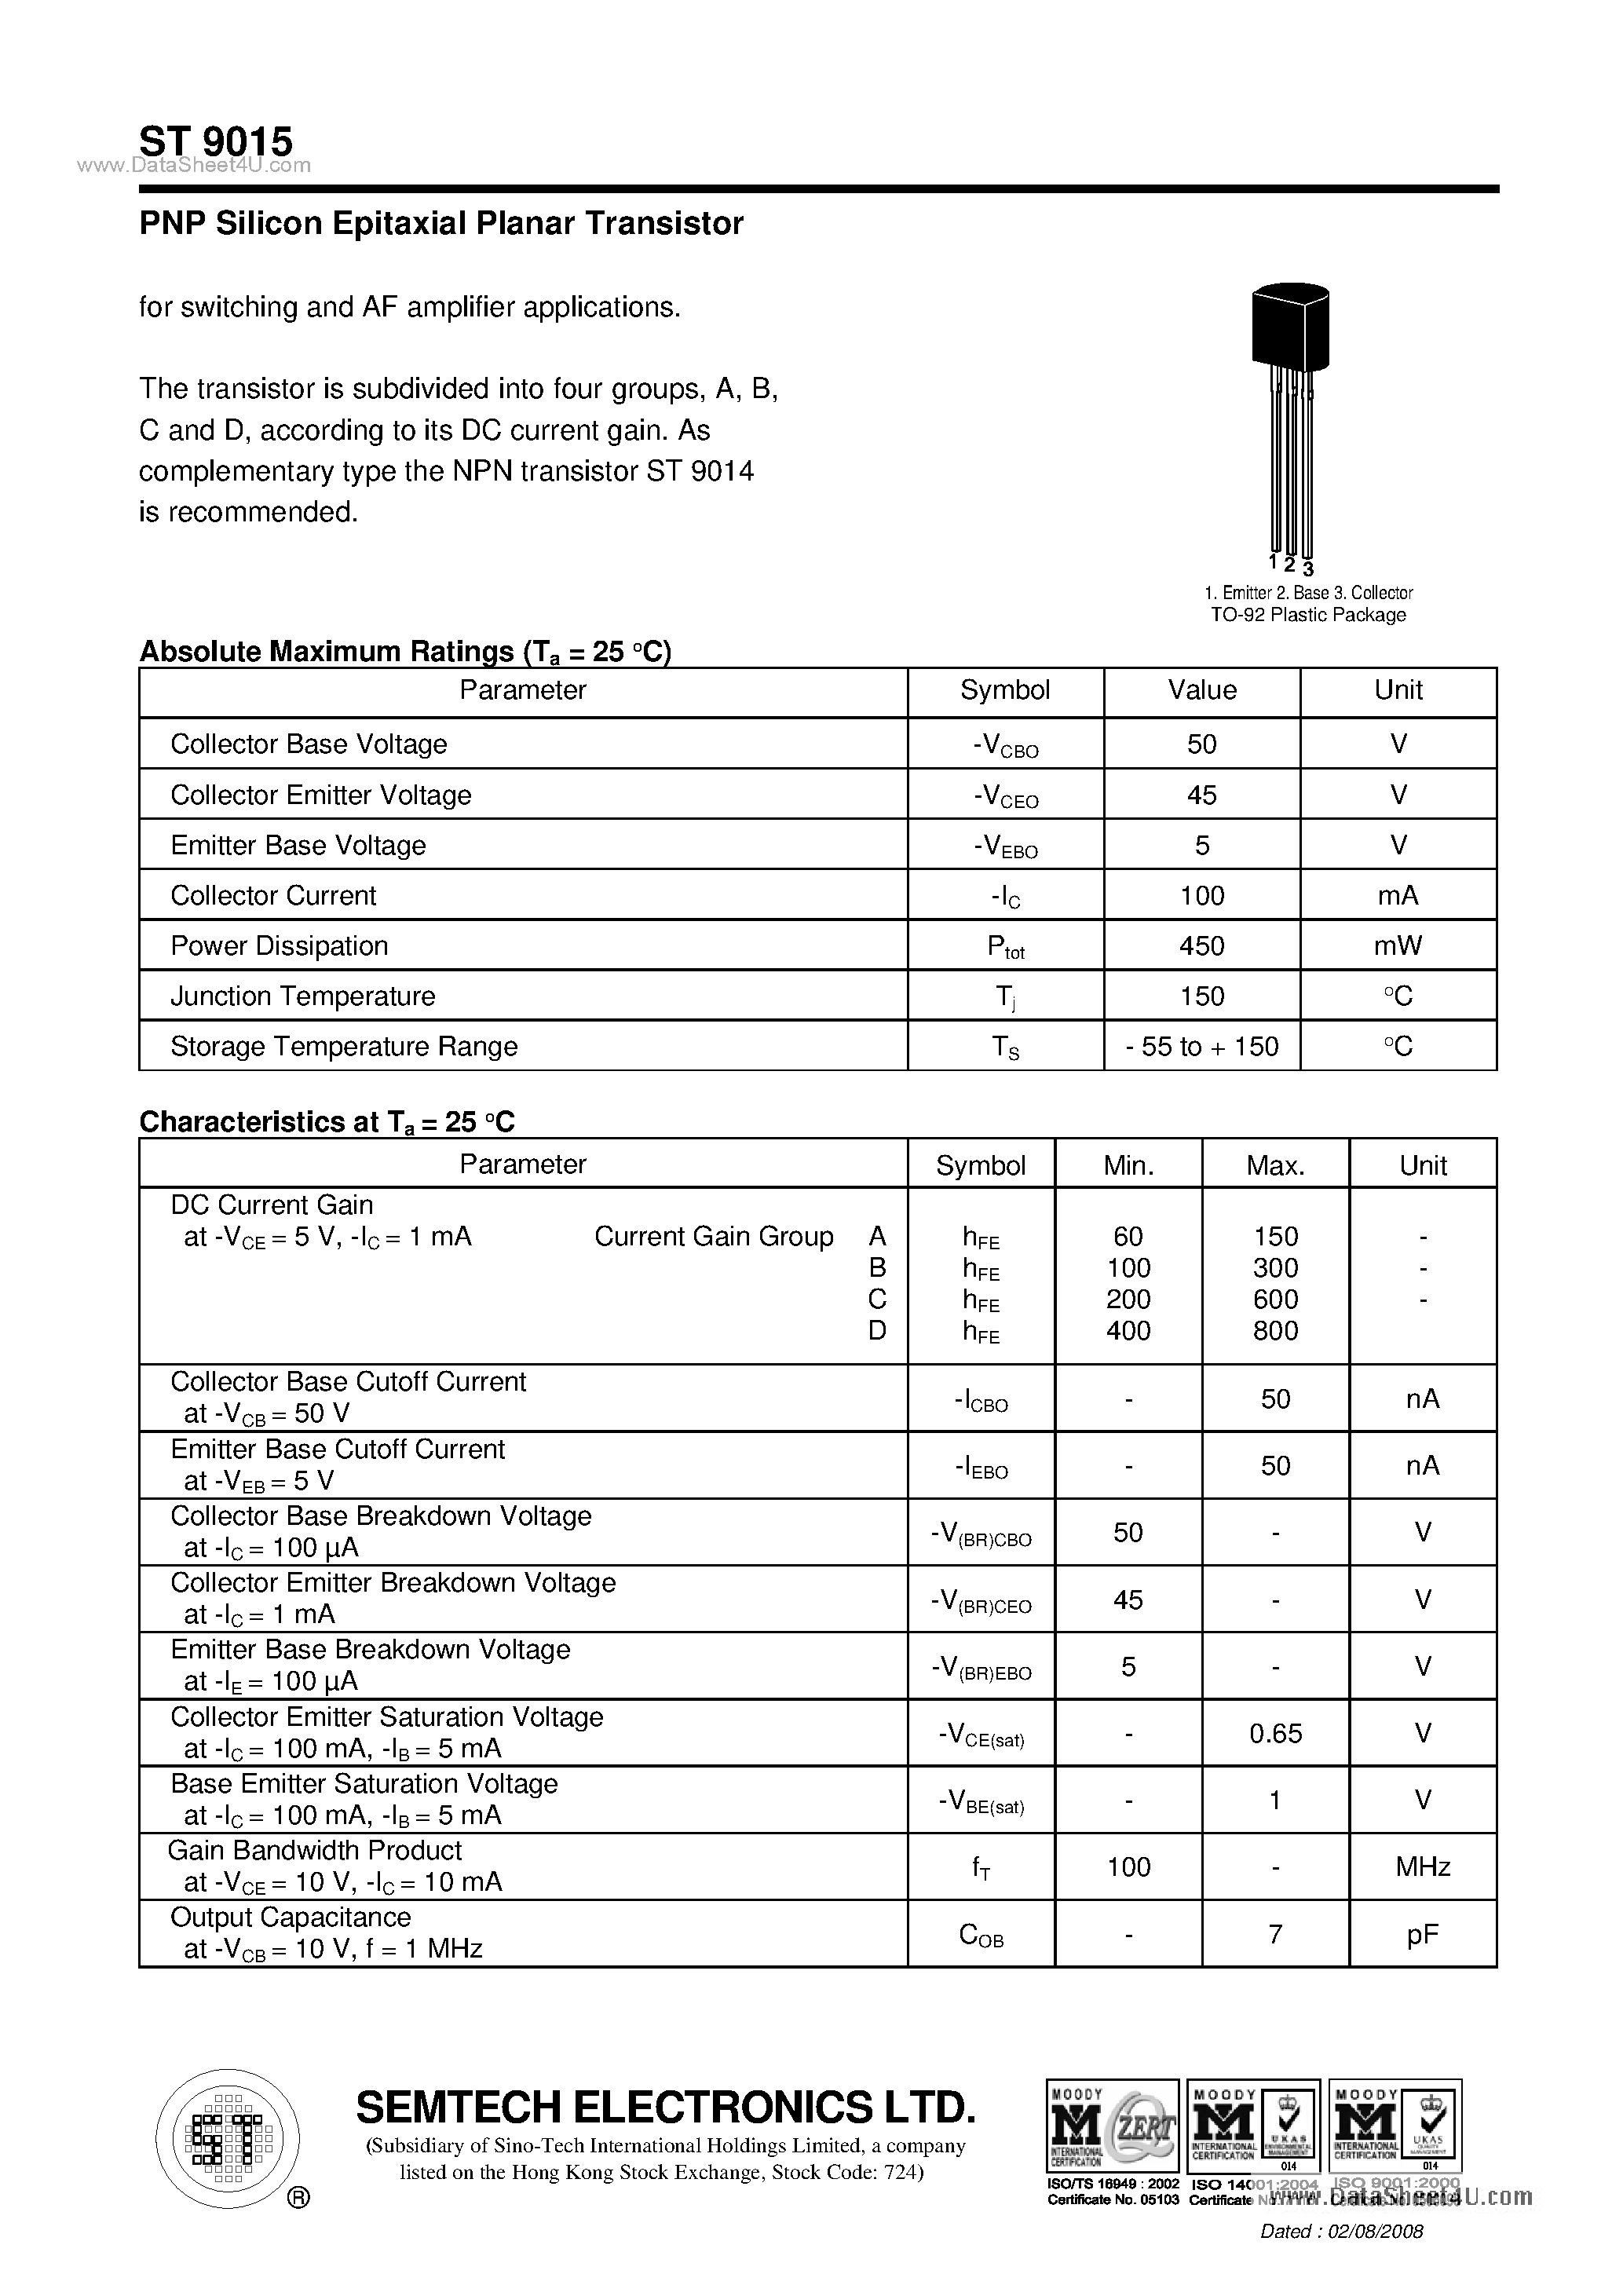 Datasheet ST9015 - PNP Silicon Epitaxial Planar Transistor page 1